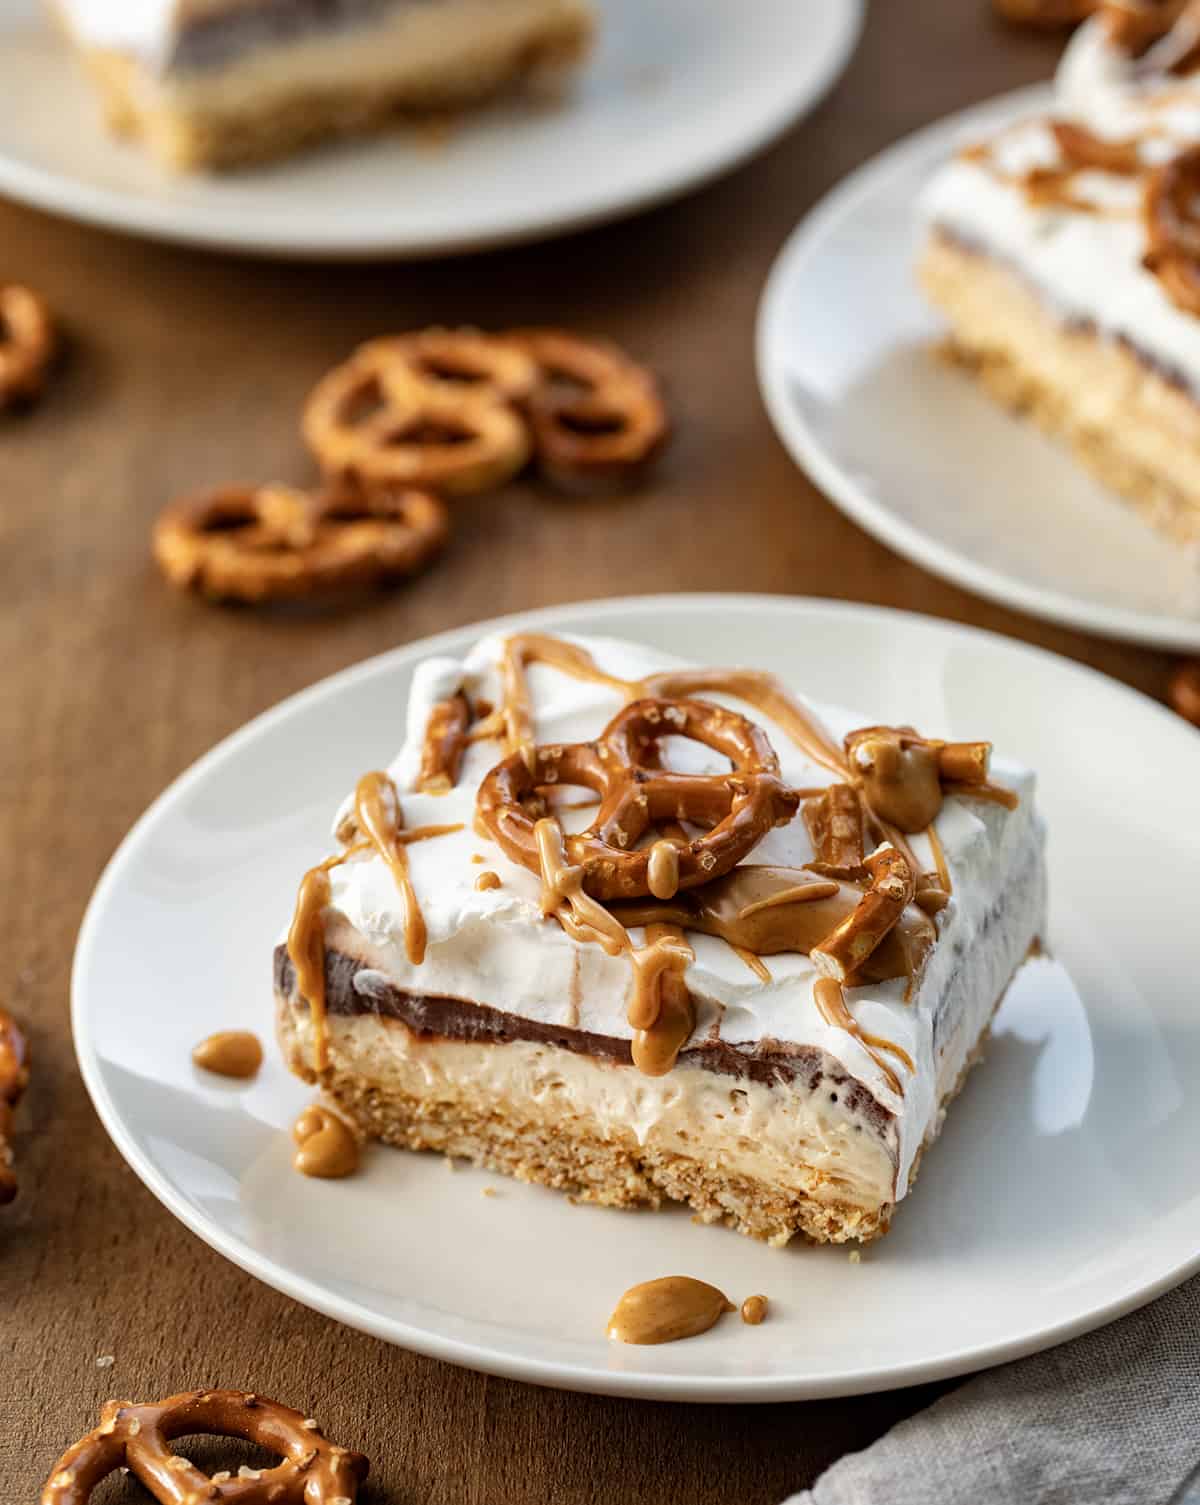 Pieces of Peanut Butter Pretzel Dessert on white plates on wooden table.